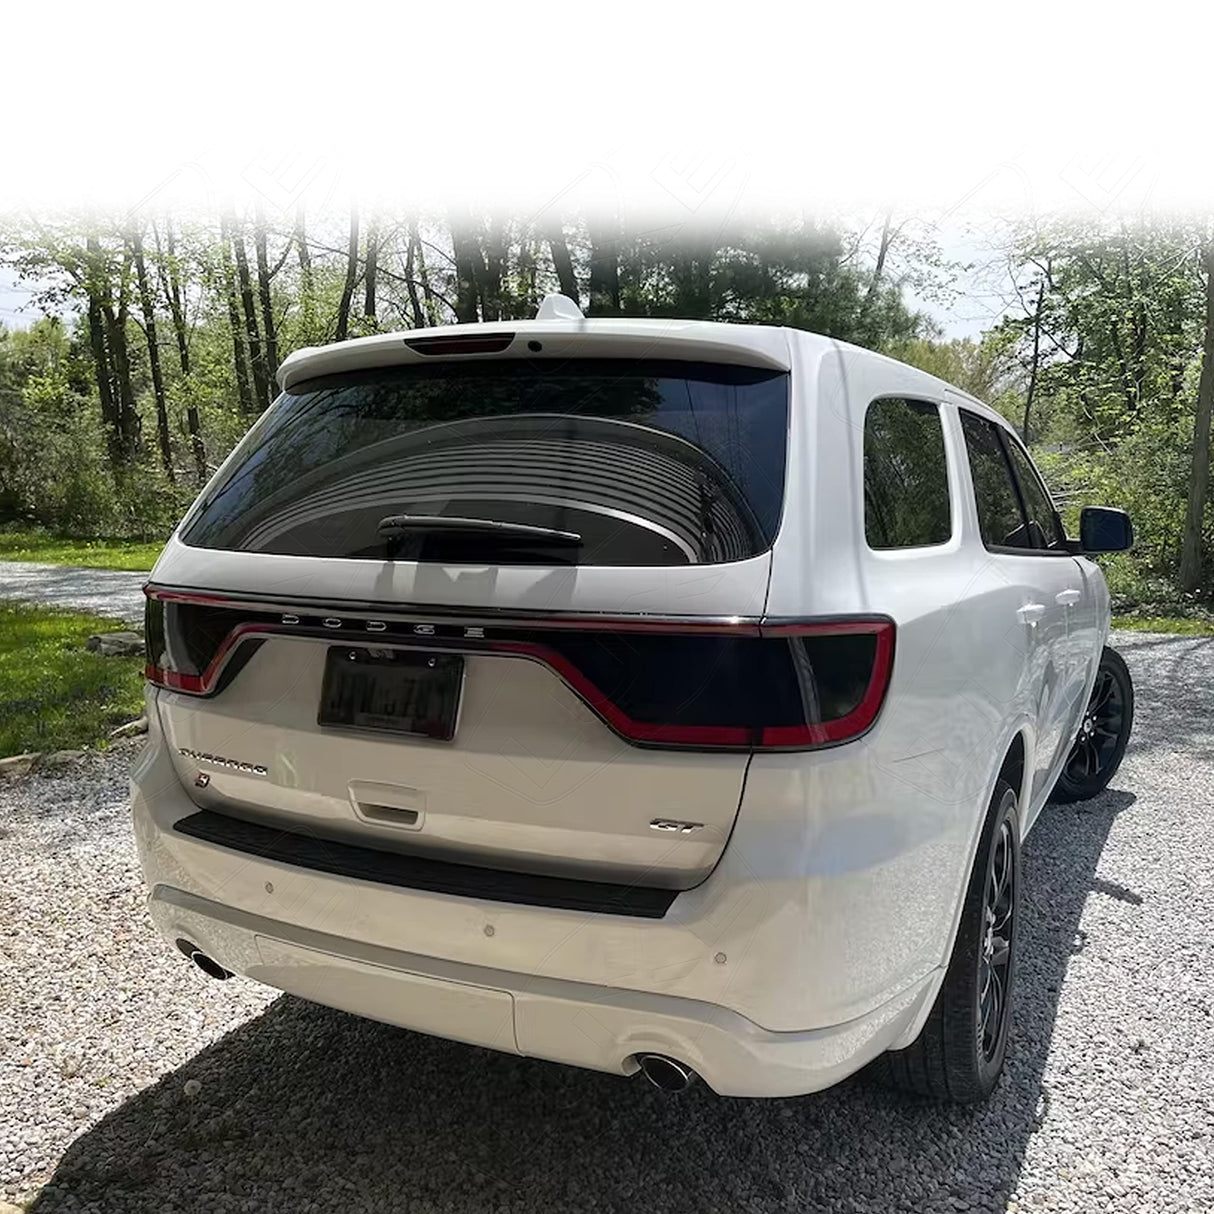 Luxe Auto Concepts Tail Light Tint Kit for 2014-22 Dodge Durango- Dark Smoke Gloss | Exact Cut Vinyl Overlays | Tinted Dry Application Luxe LightWrap Film with Air Release Technology